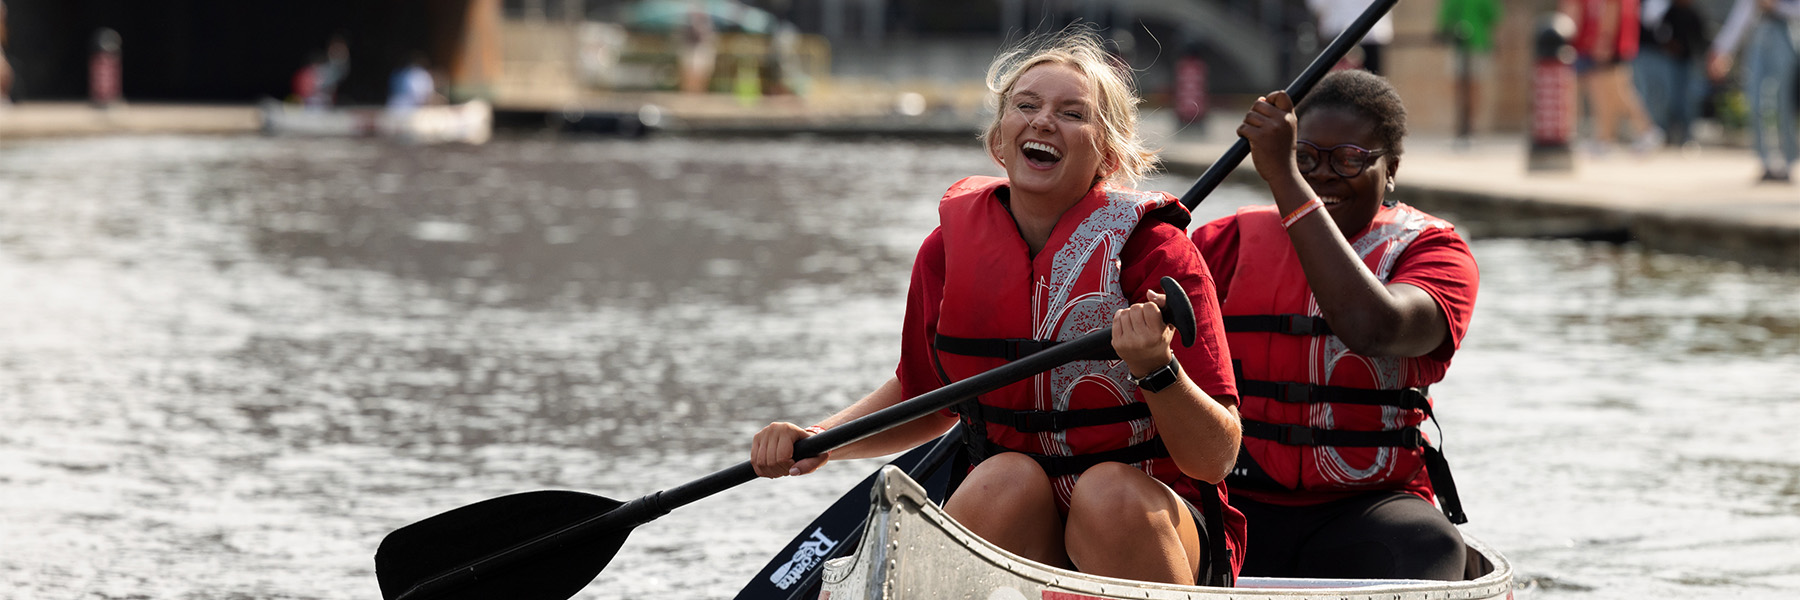 Two students are joyfully paddling their canoe during the IU Indianapolis Regatta. Both of them are wearing crimson colored shirt along with life jackets.